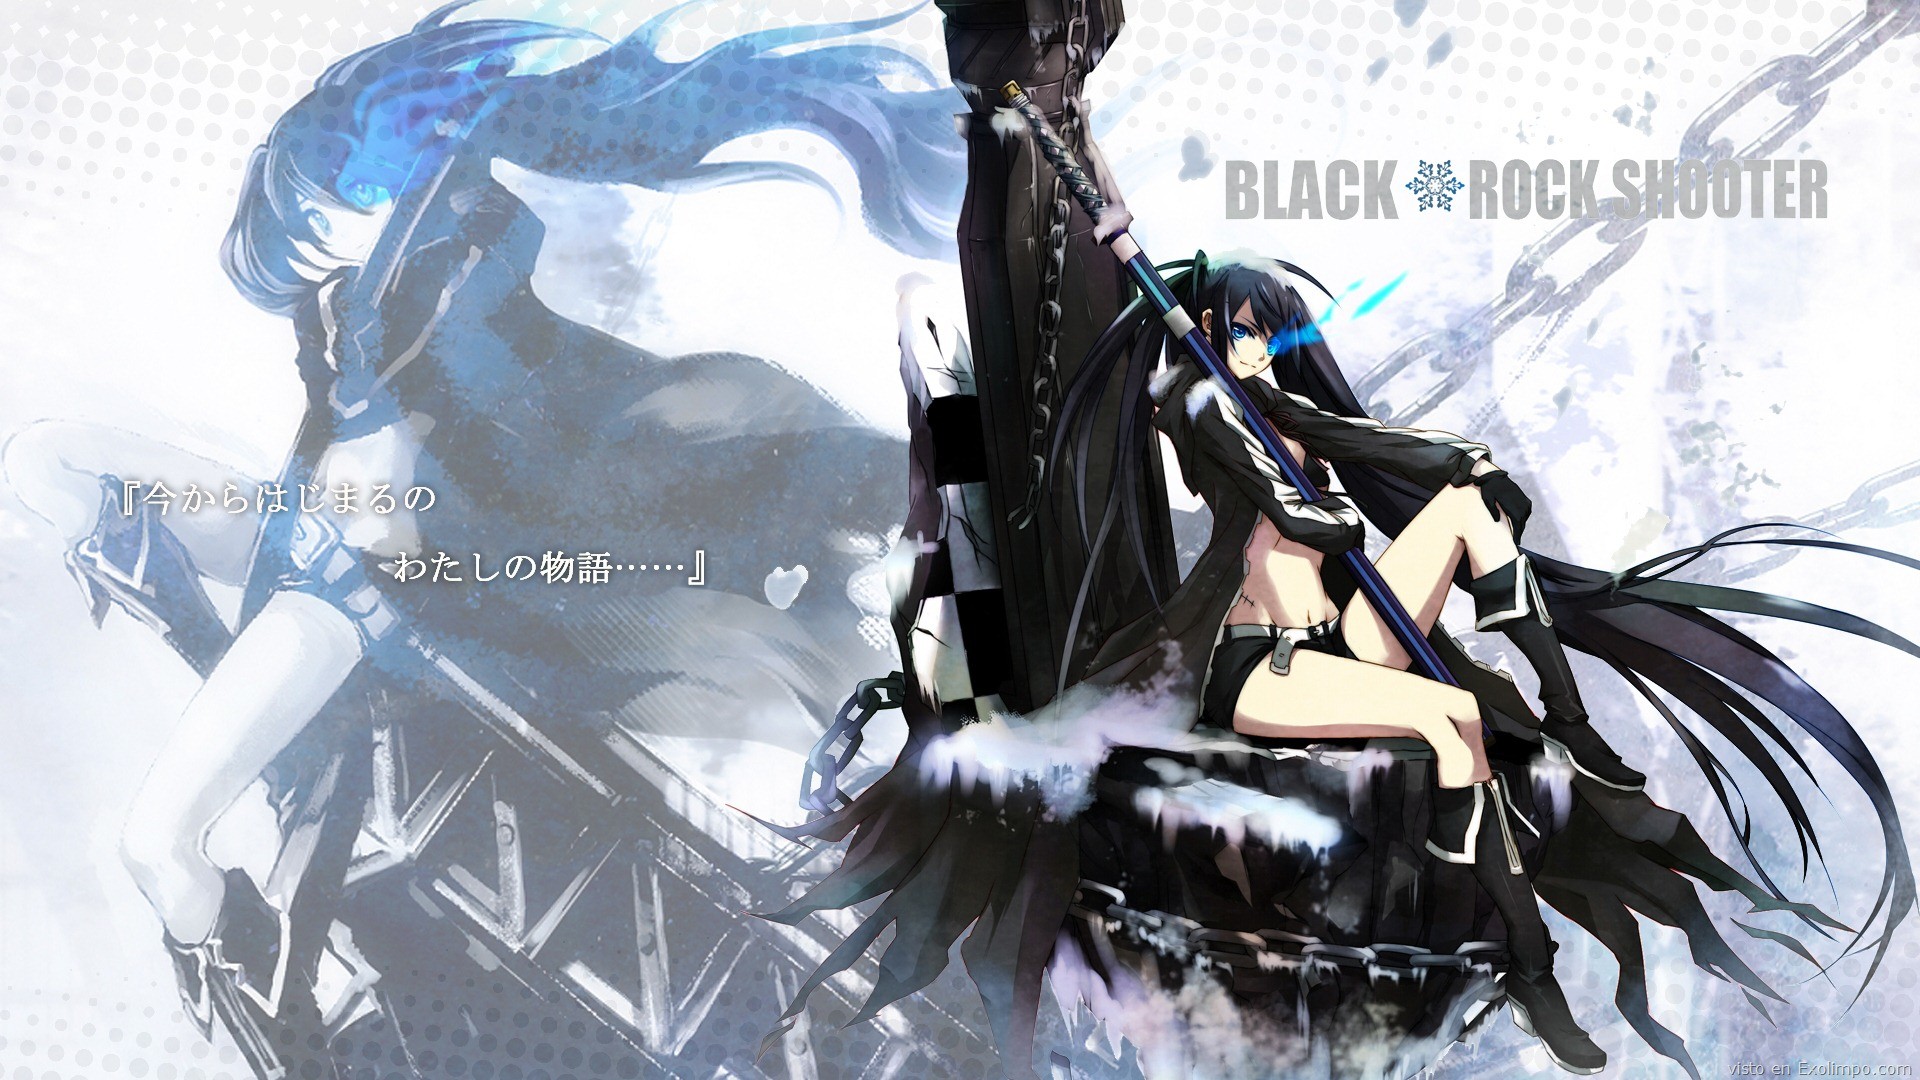 1920x1080 black rock shooter(vocaloid) images Black Rock Shooter :3 HD wallpaper and  background photos